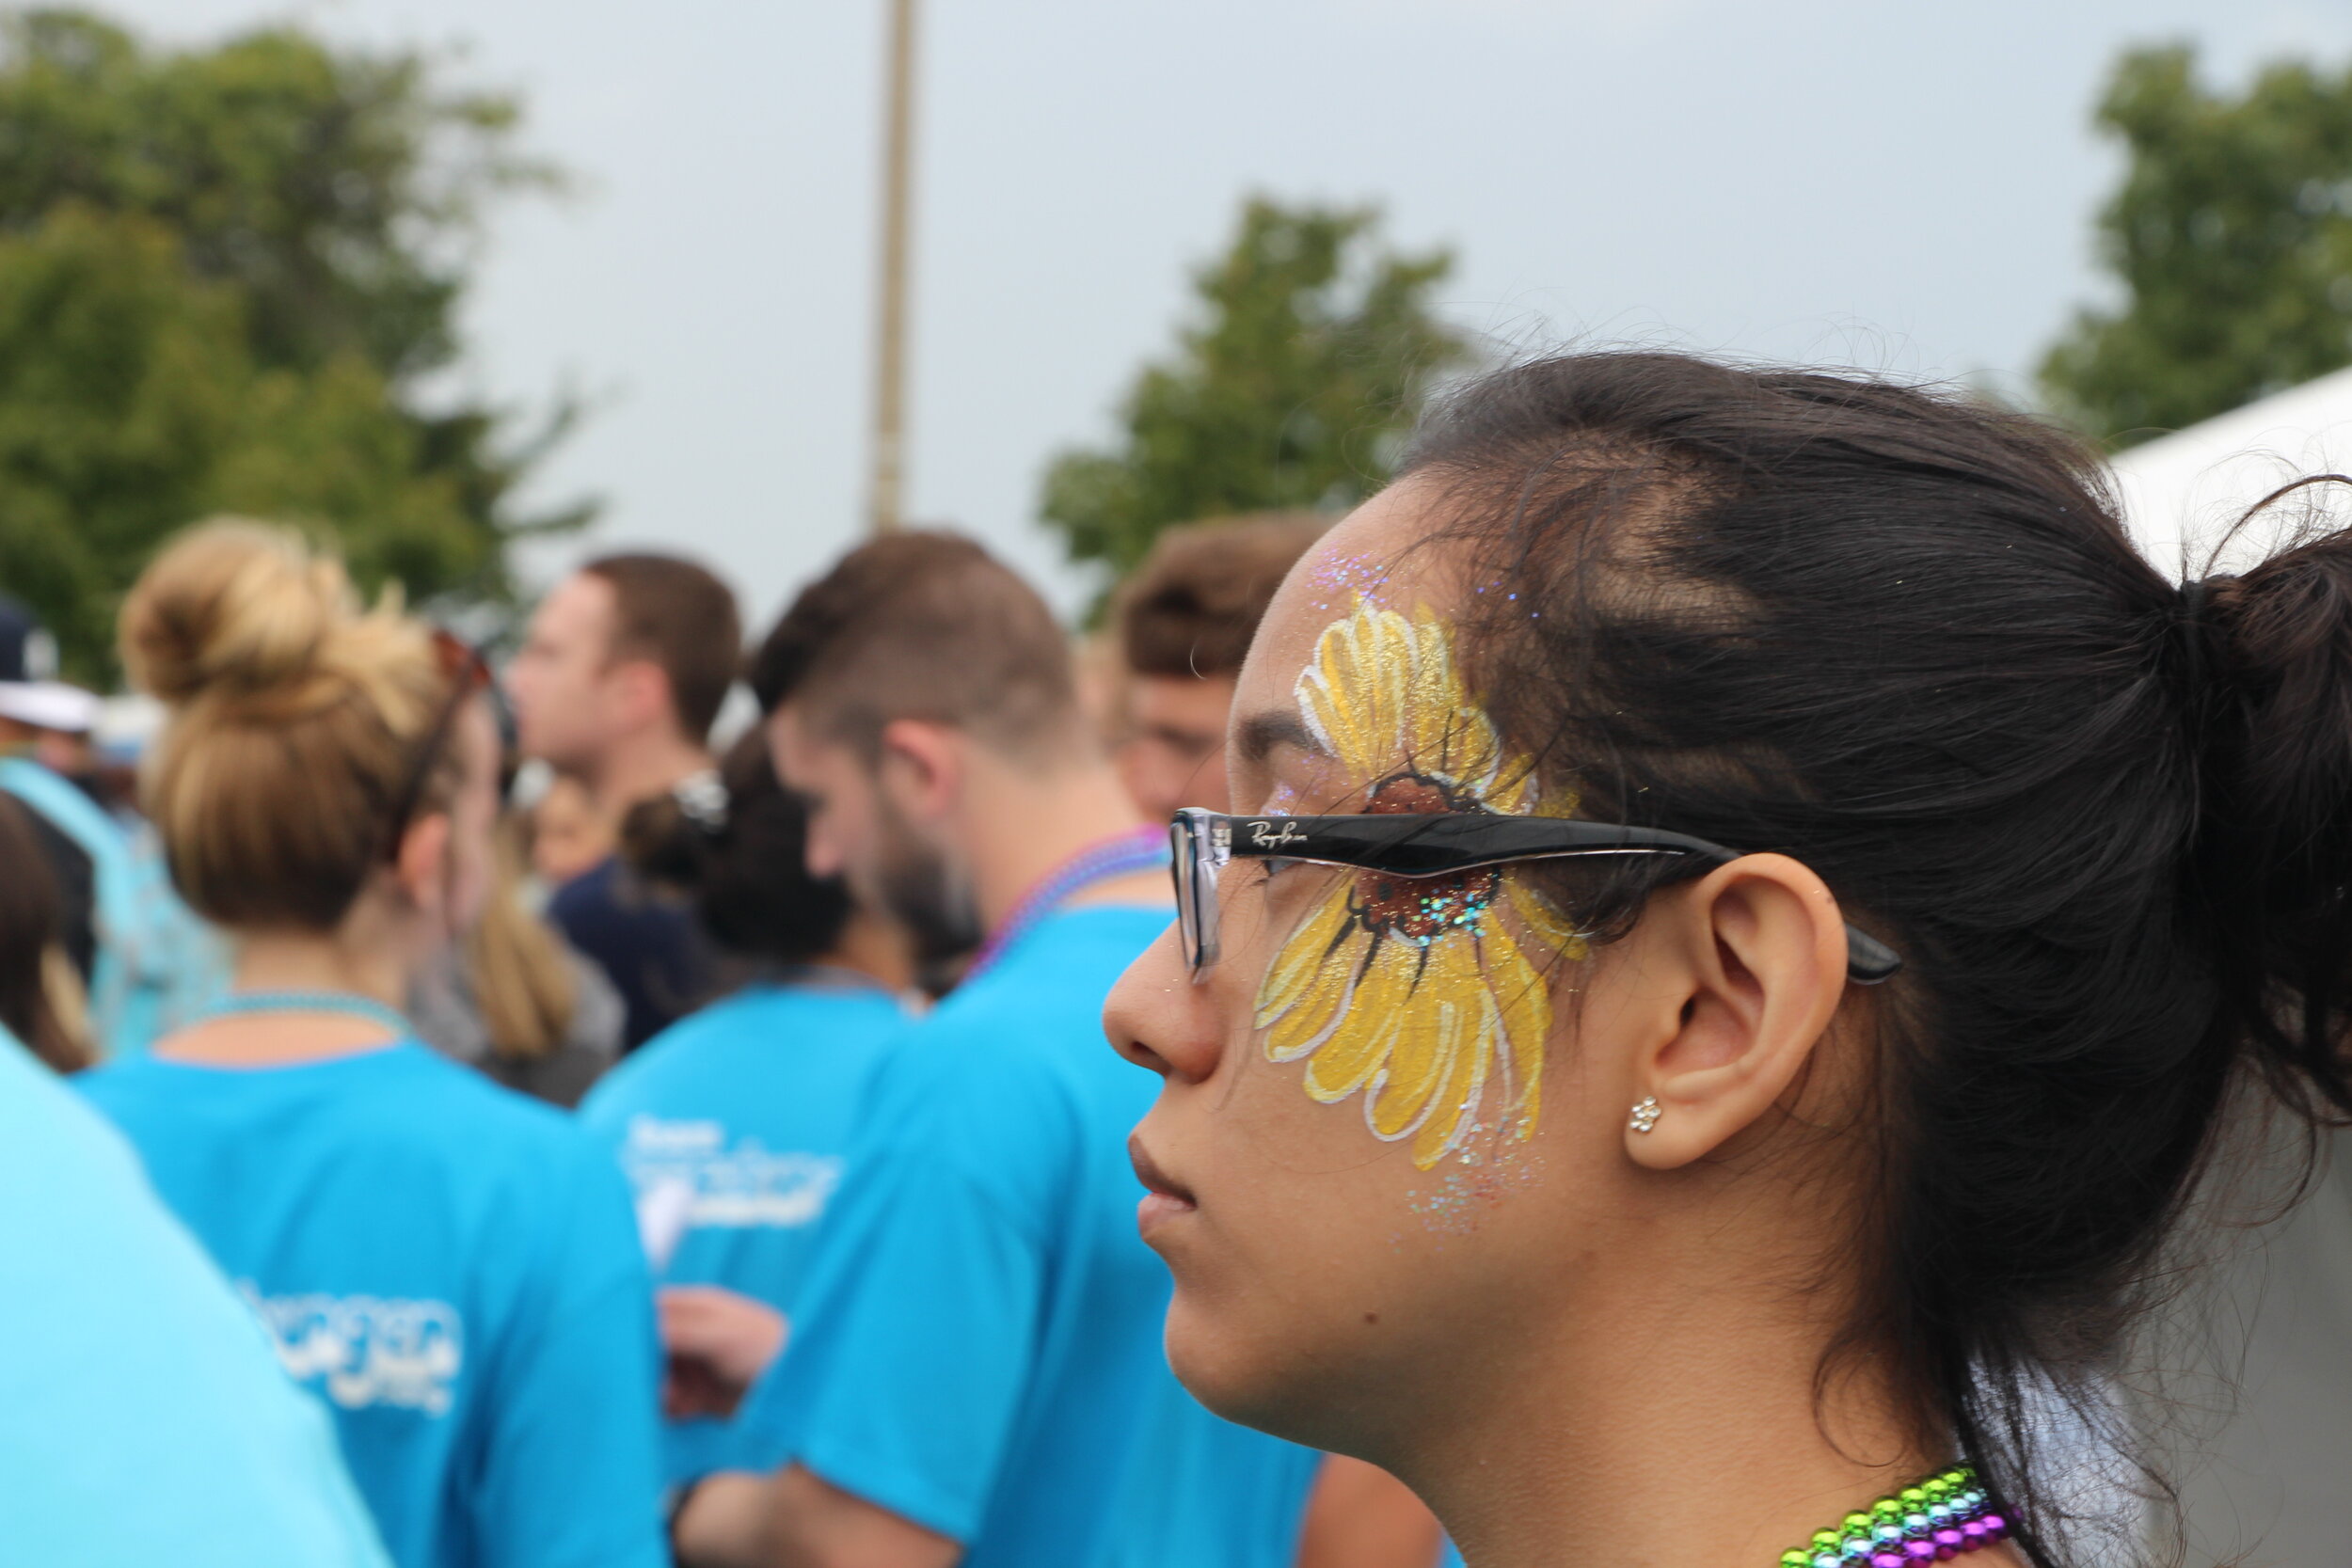 A participant wearing face-paint in the shape of a sunflower.